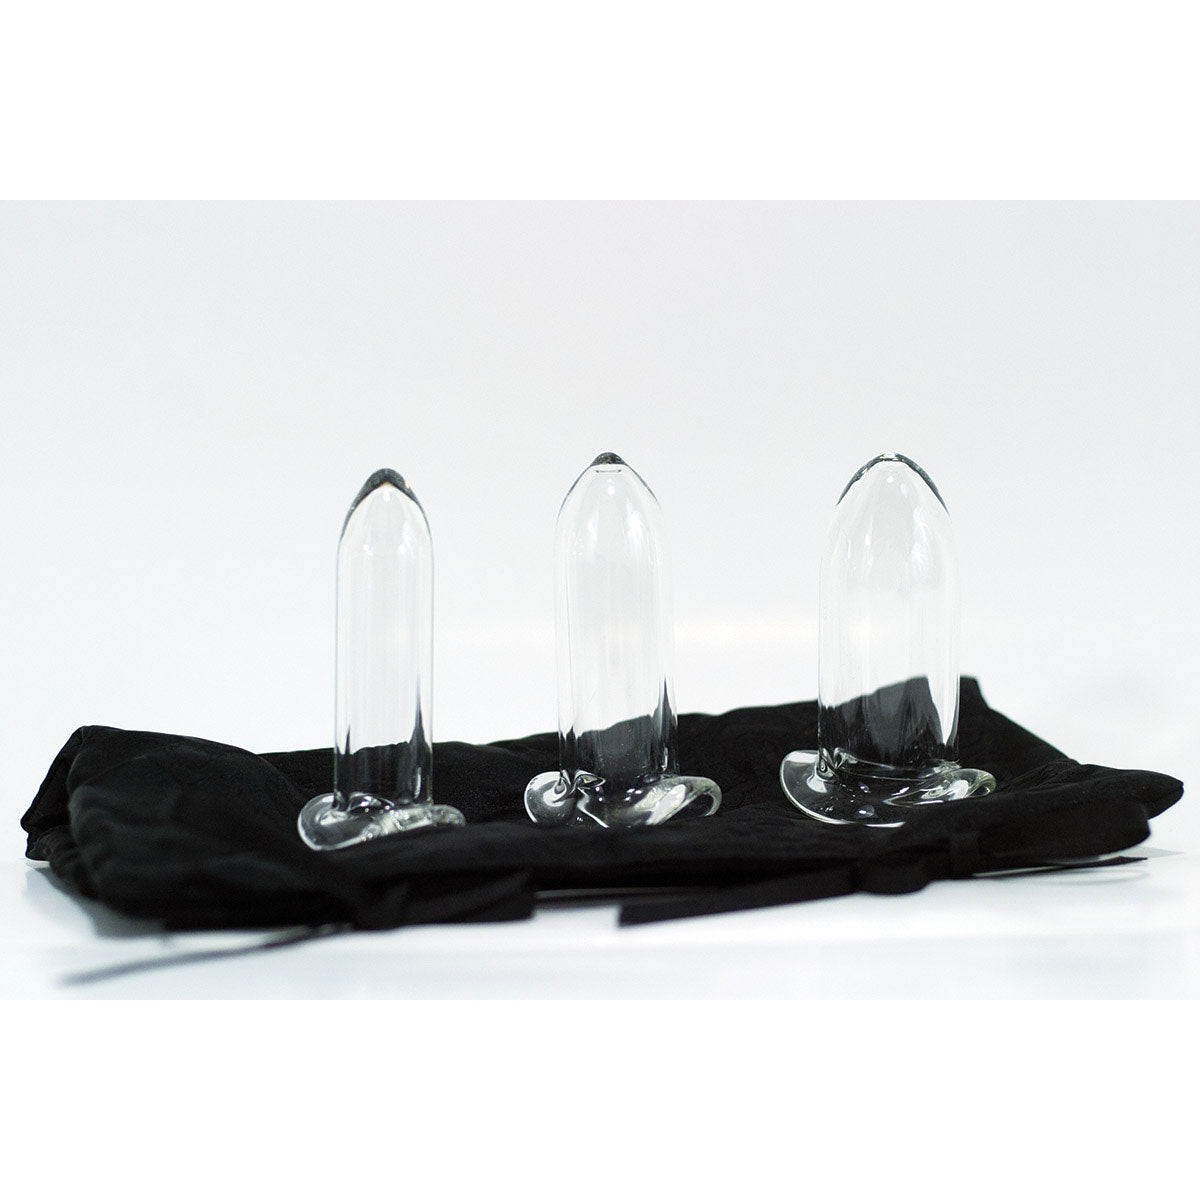 Crystal Delights Dilator Set of 3 Intimates Adult Boutique